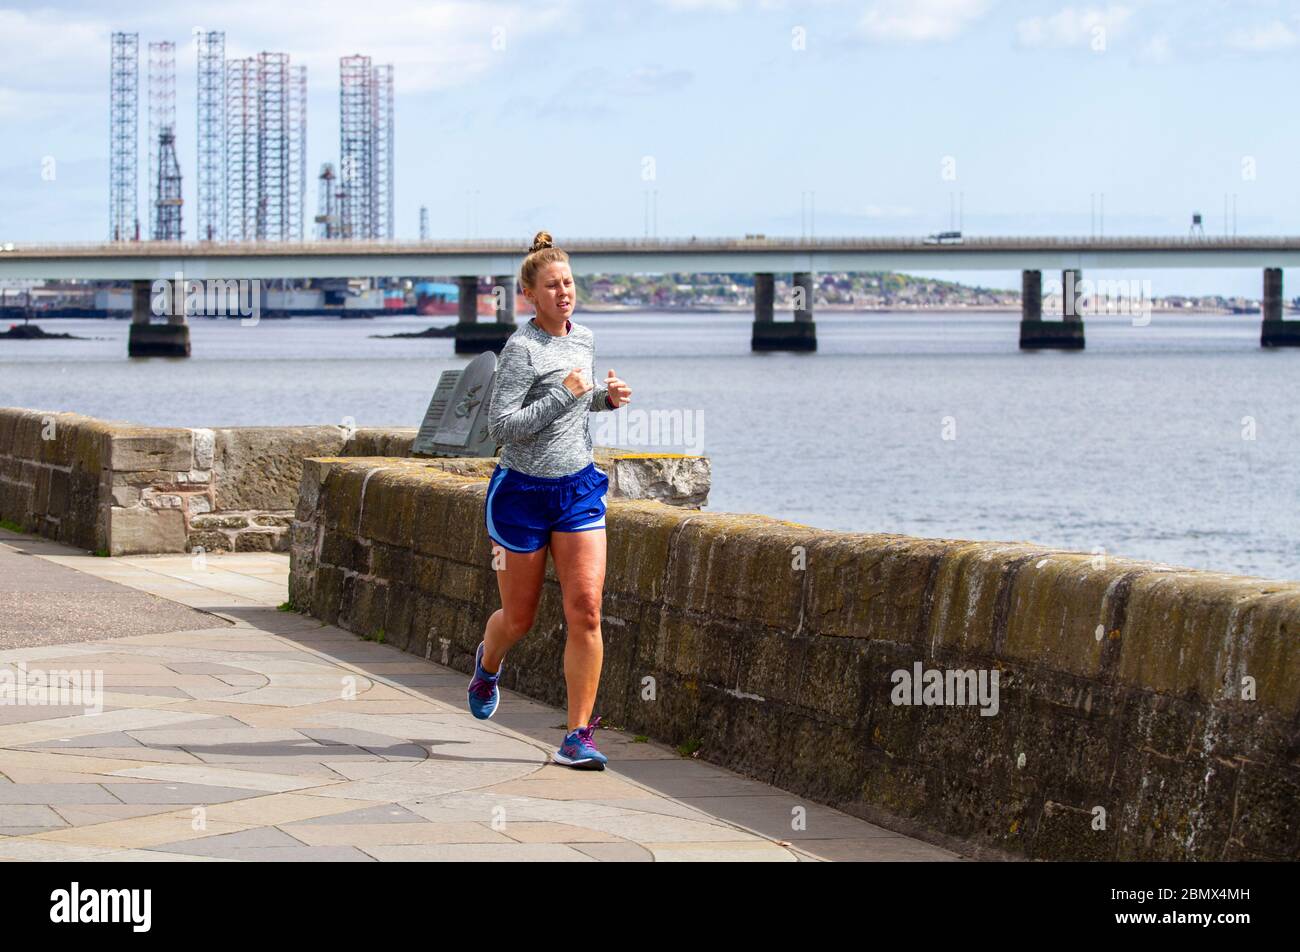 Dundee, Tayside, Scotland, UK. 11th May, 2020. UK Weather: A cooler day with sunshine in Dundee Scotland with maximum temperature 12°C. Local residents enjoying the weather while taking light outdoor exercises jogging along the riverside promenade during the Covid-19 lockdown restrictions. Credit: Dundee Photographics/Alamy Live News Stock Photo